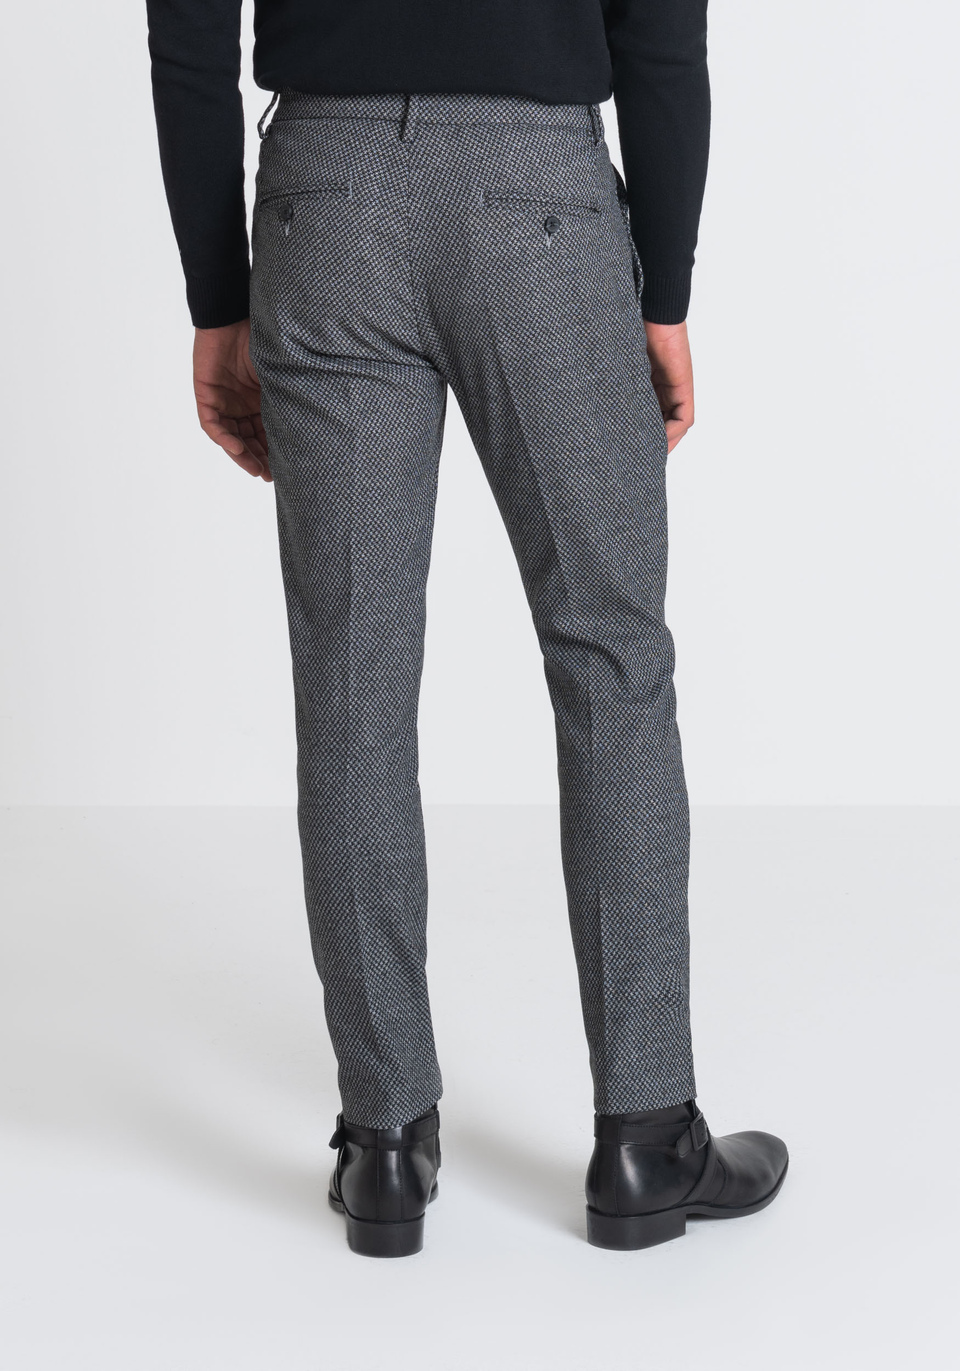 CARROT-FIT “QUENTIN” TROUSERS IN A SOFT STRETCH FABRIC - Antony Morato Online Shop